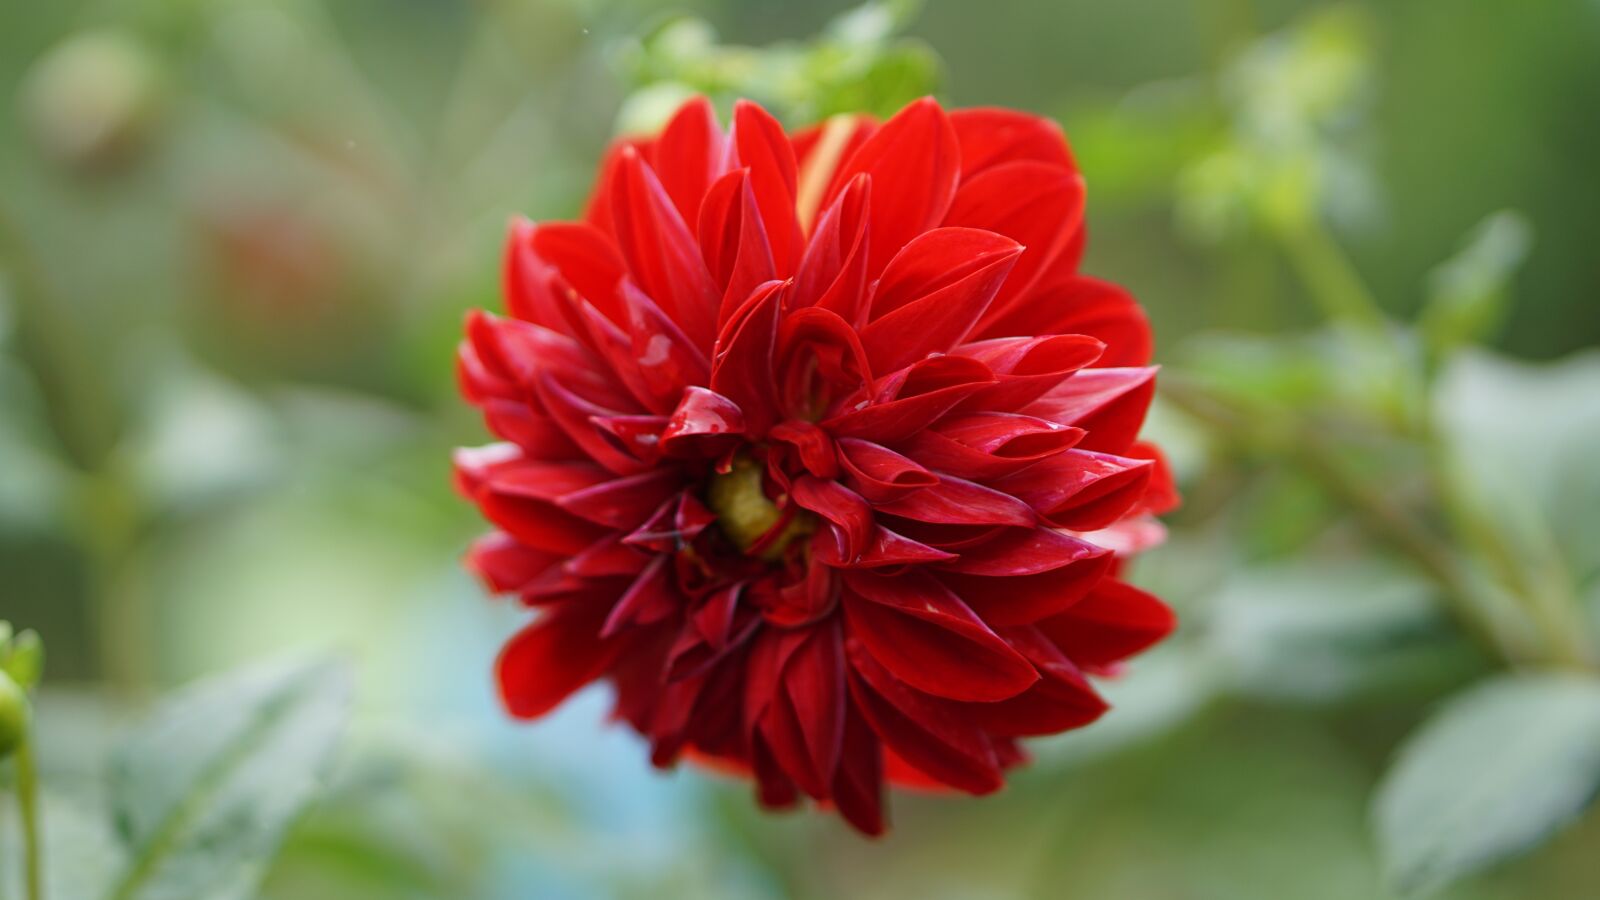 Sony a5100 + E 50mm F1.8 OSS sample photo. Flower, red, petals photography